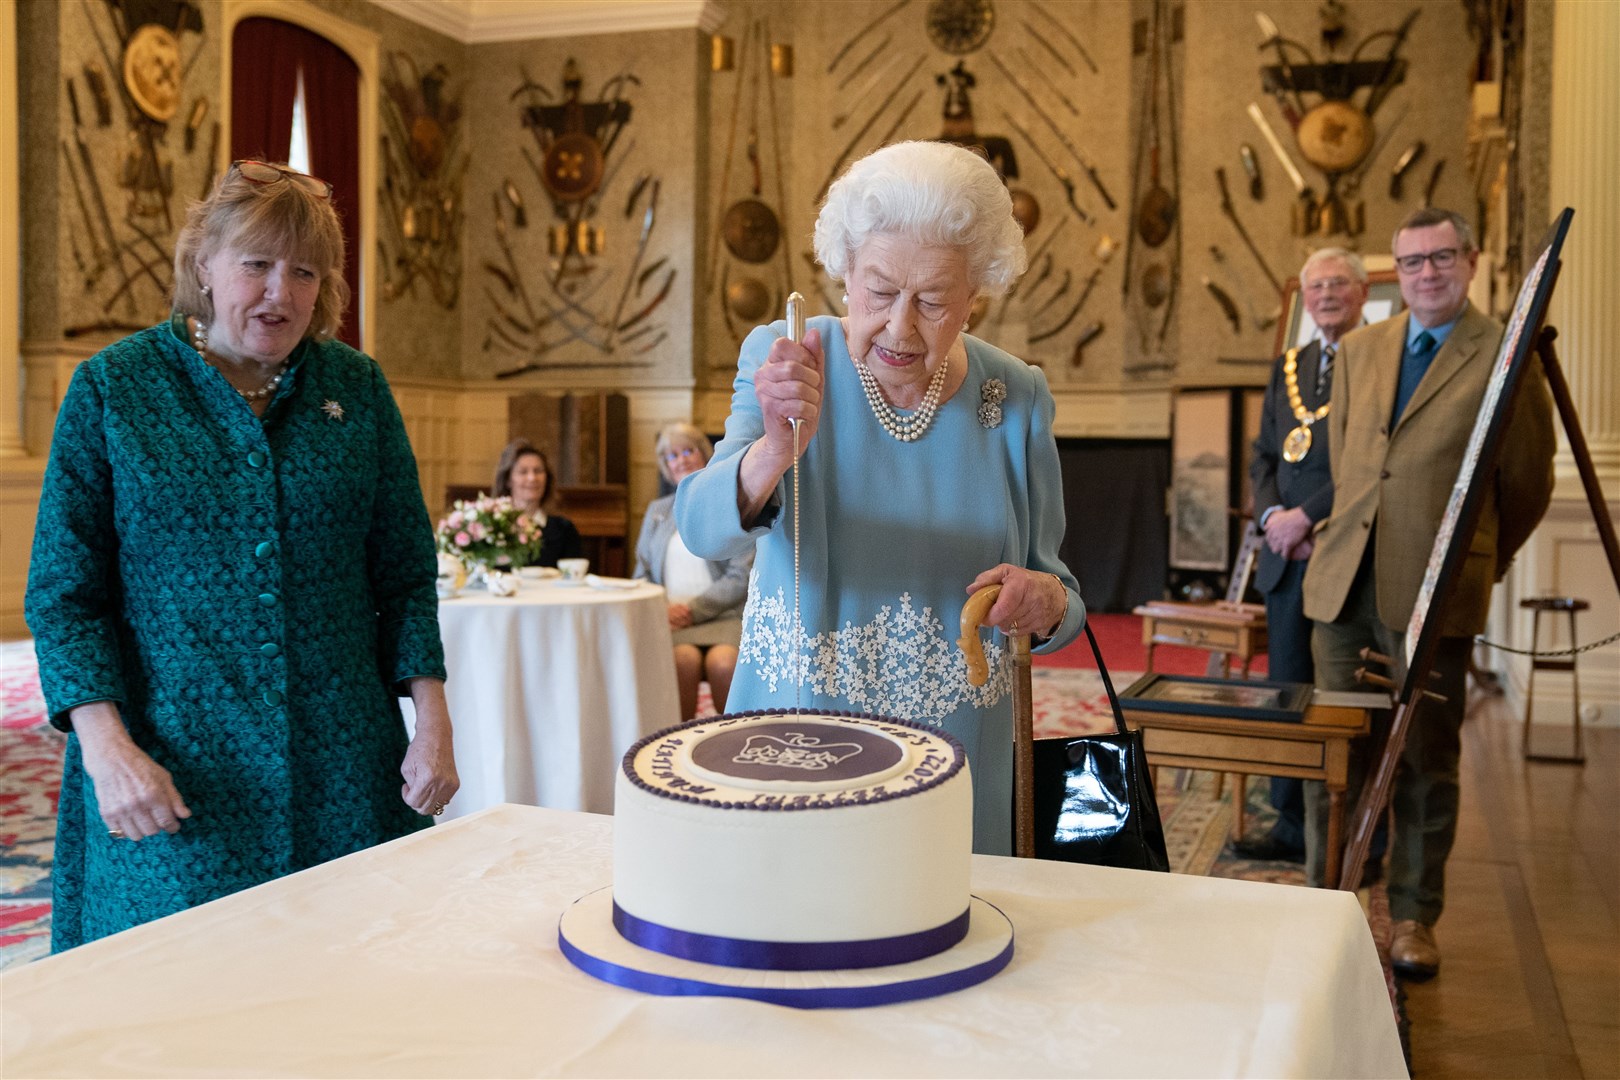 The Queen cuts a cake to celebrate the start of the Platinum Jubilee in February 2022 (Joe Giddens/PA)